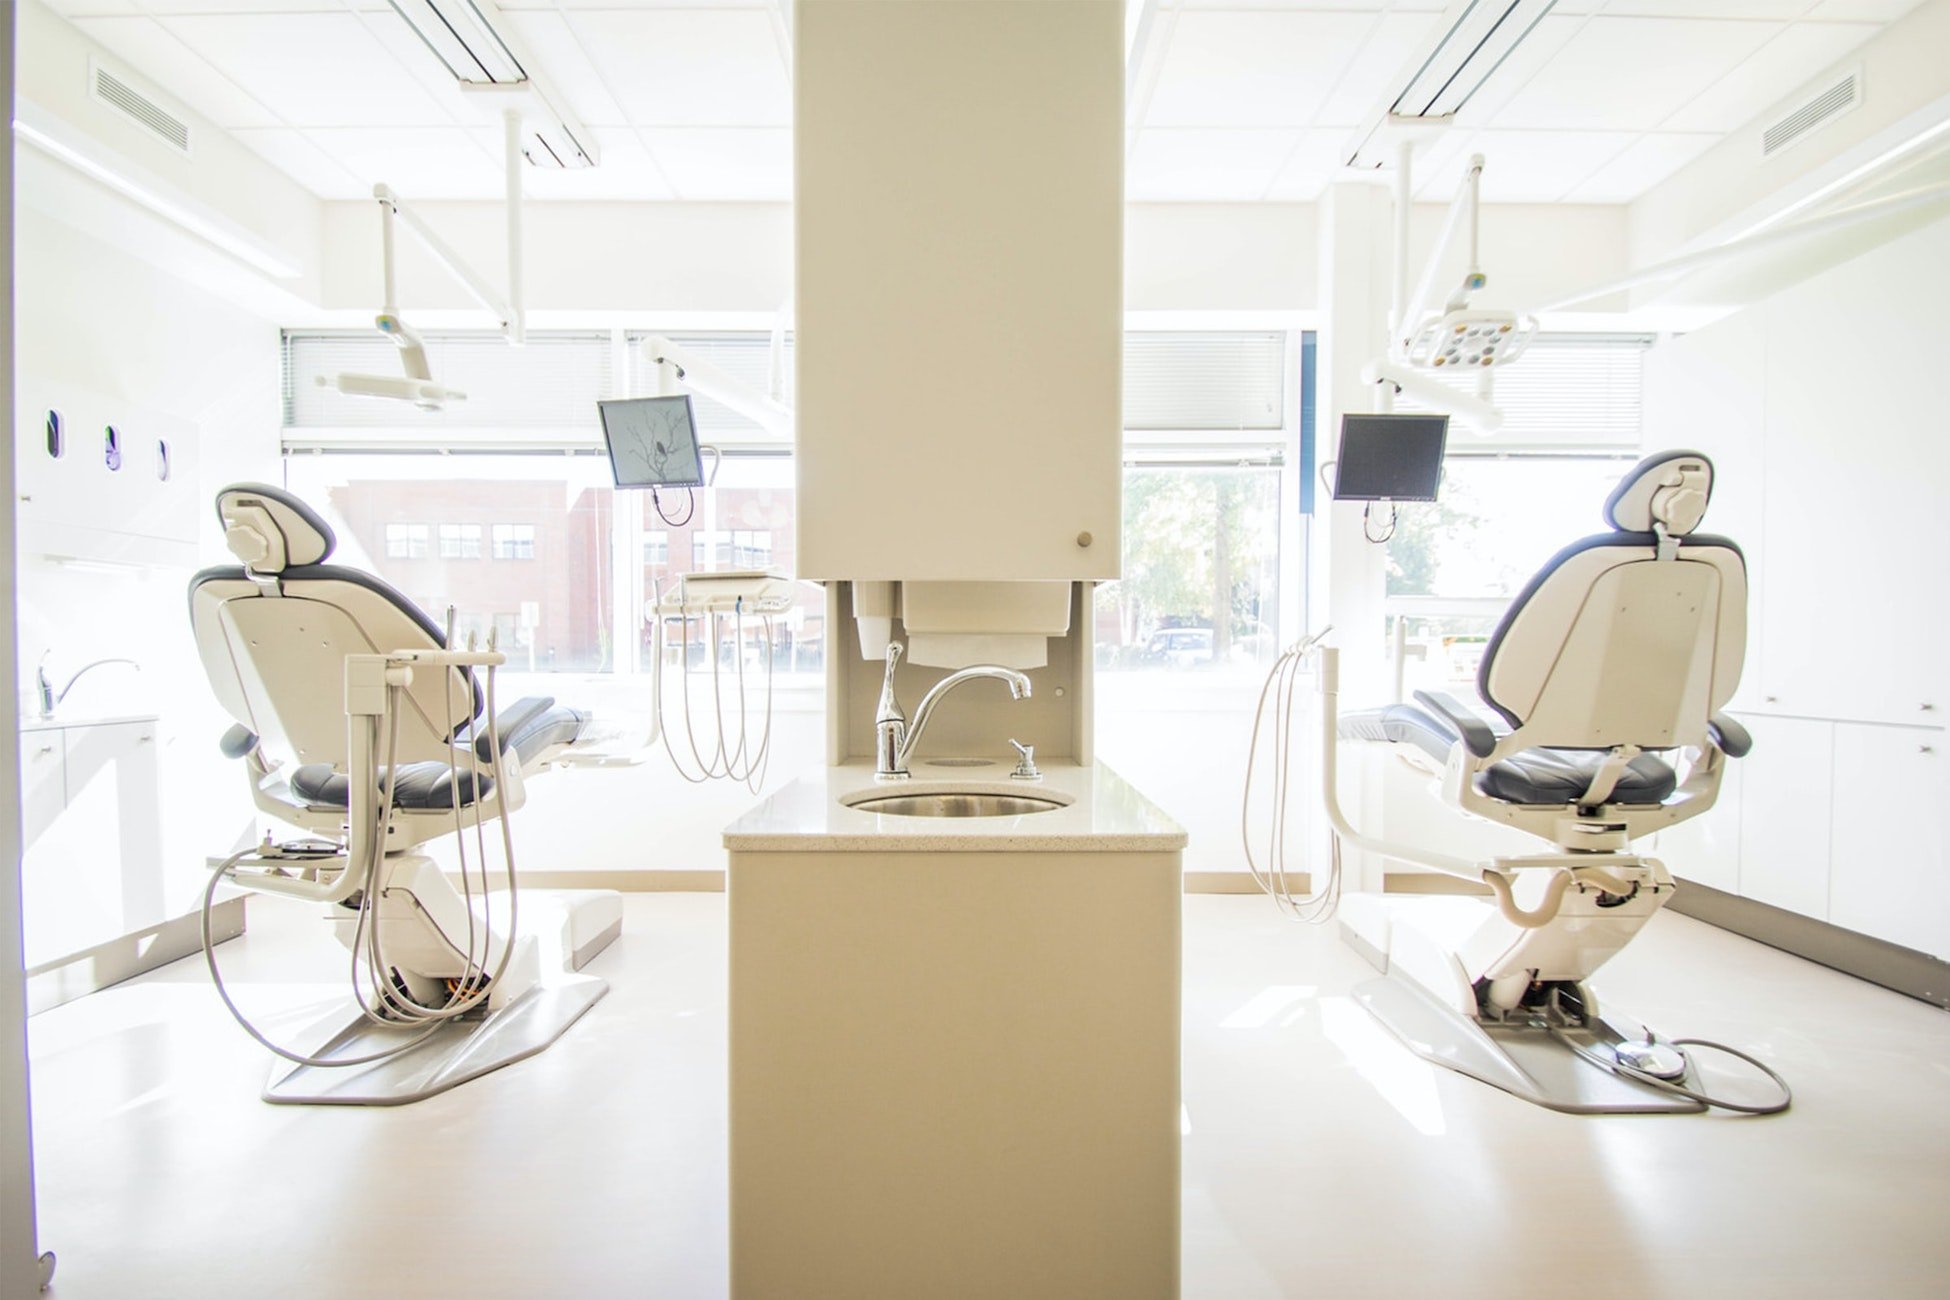 No-Show Fees- Should Your Dental Practice Use Them?